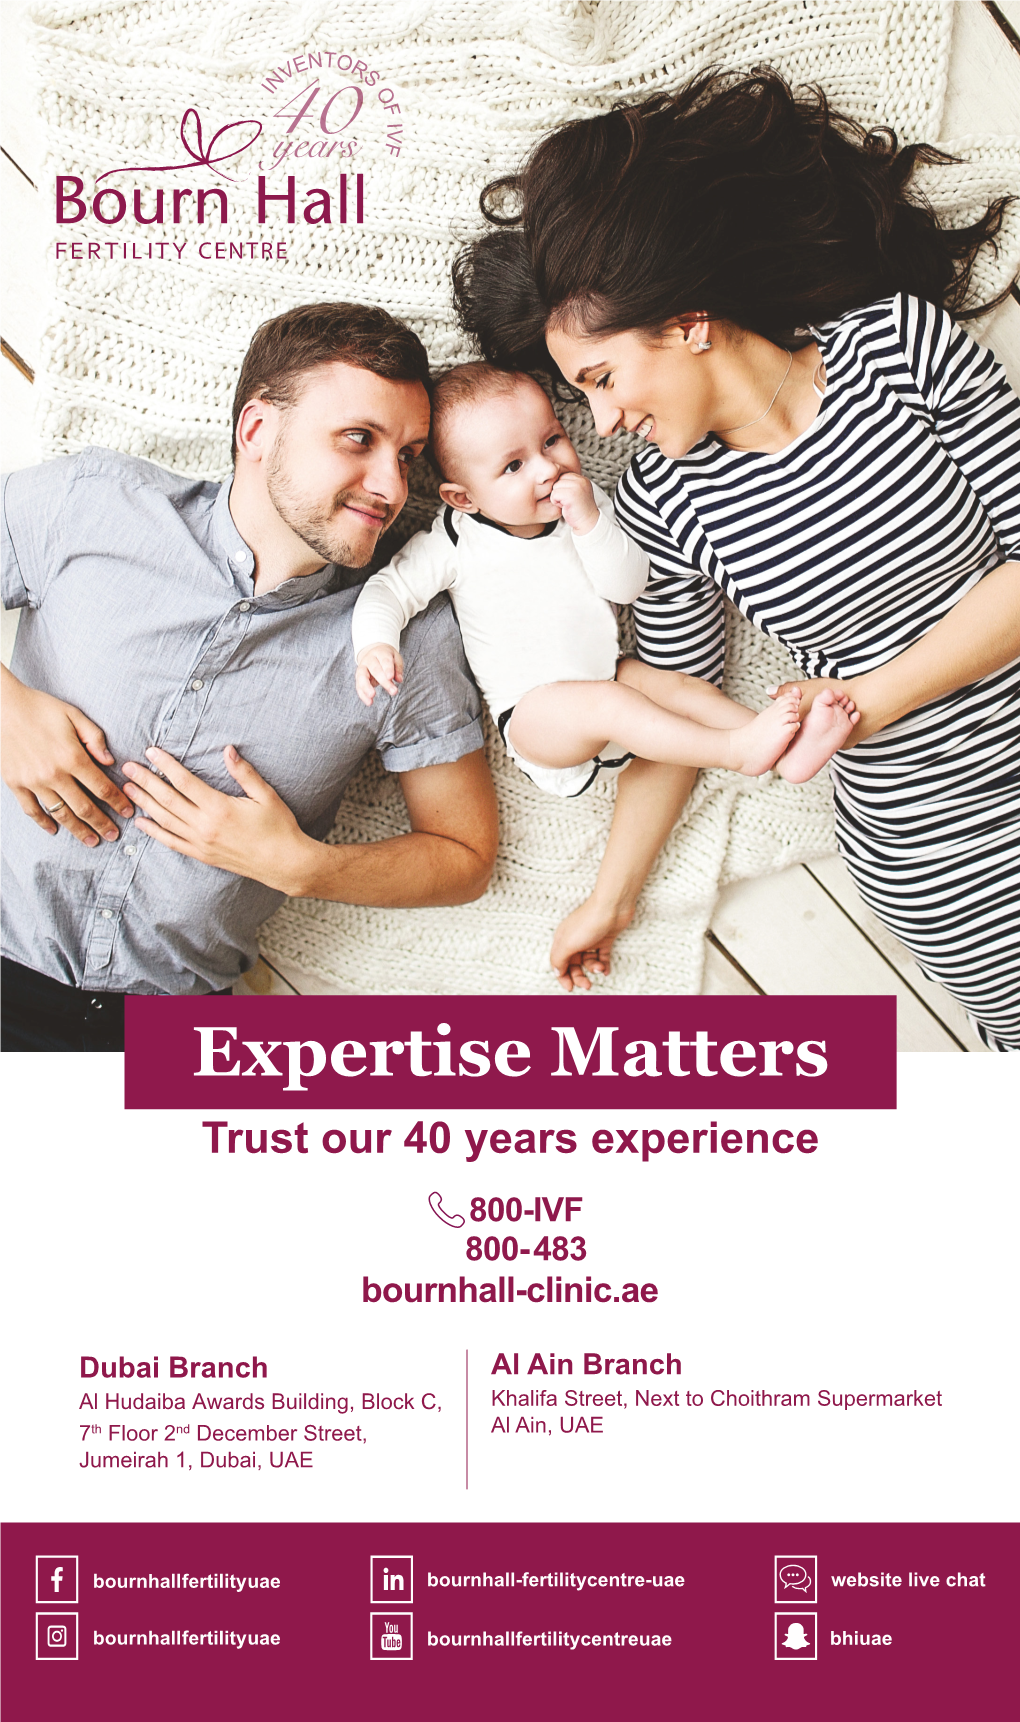 BH Expertise Matters